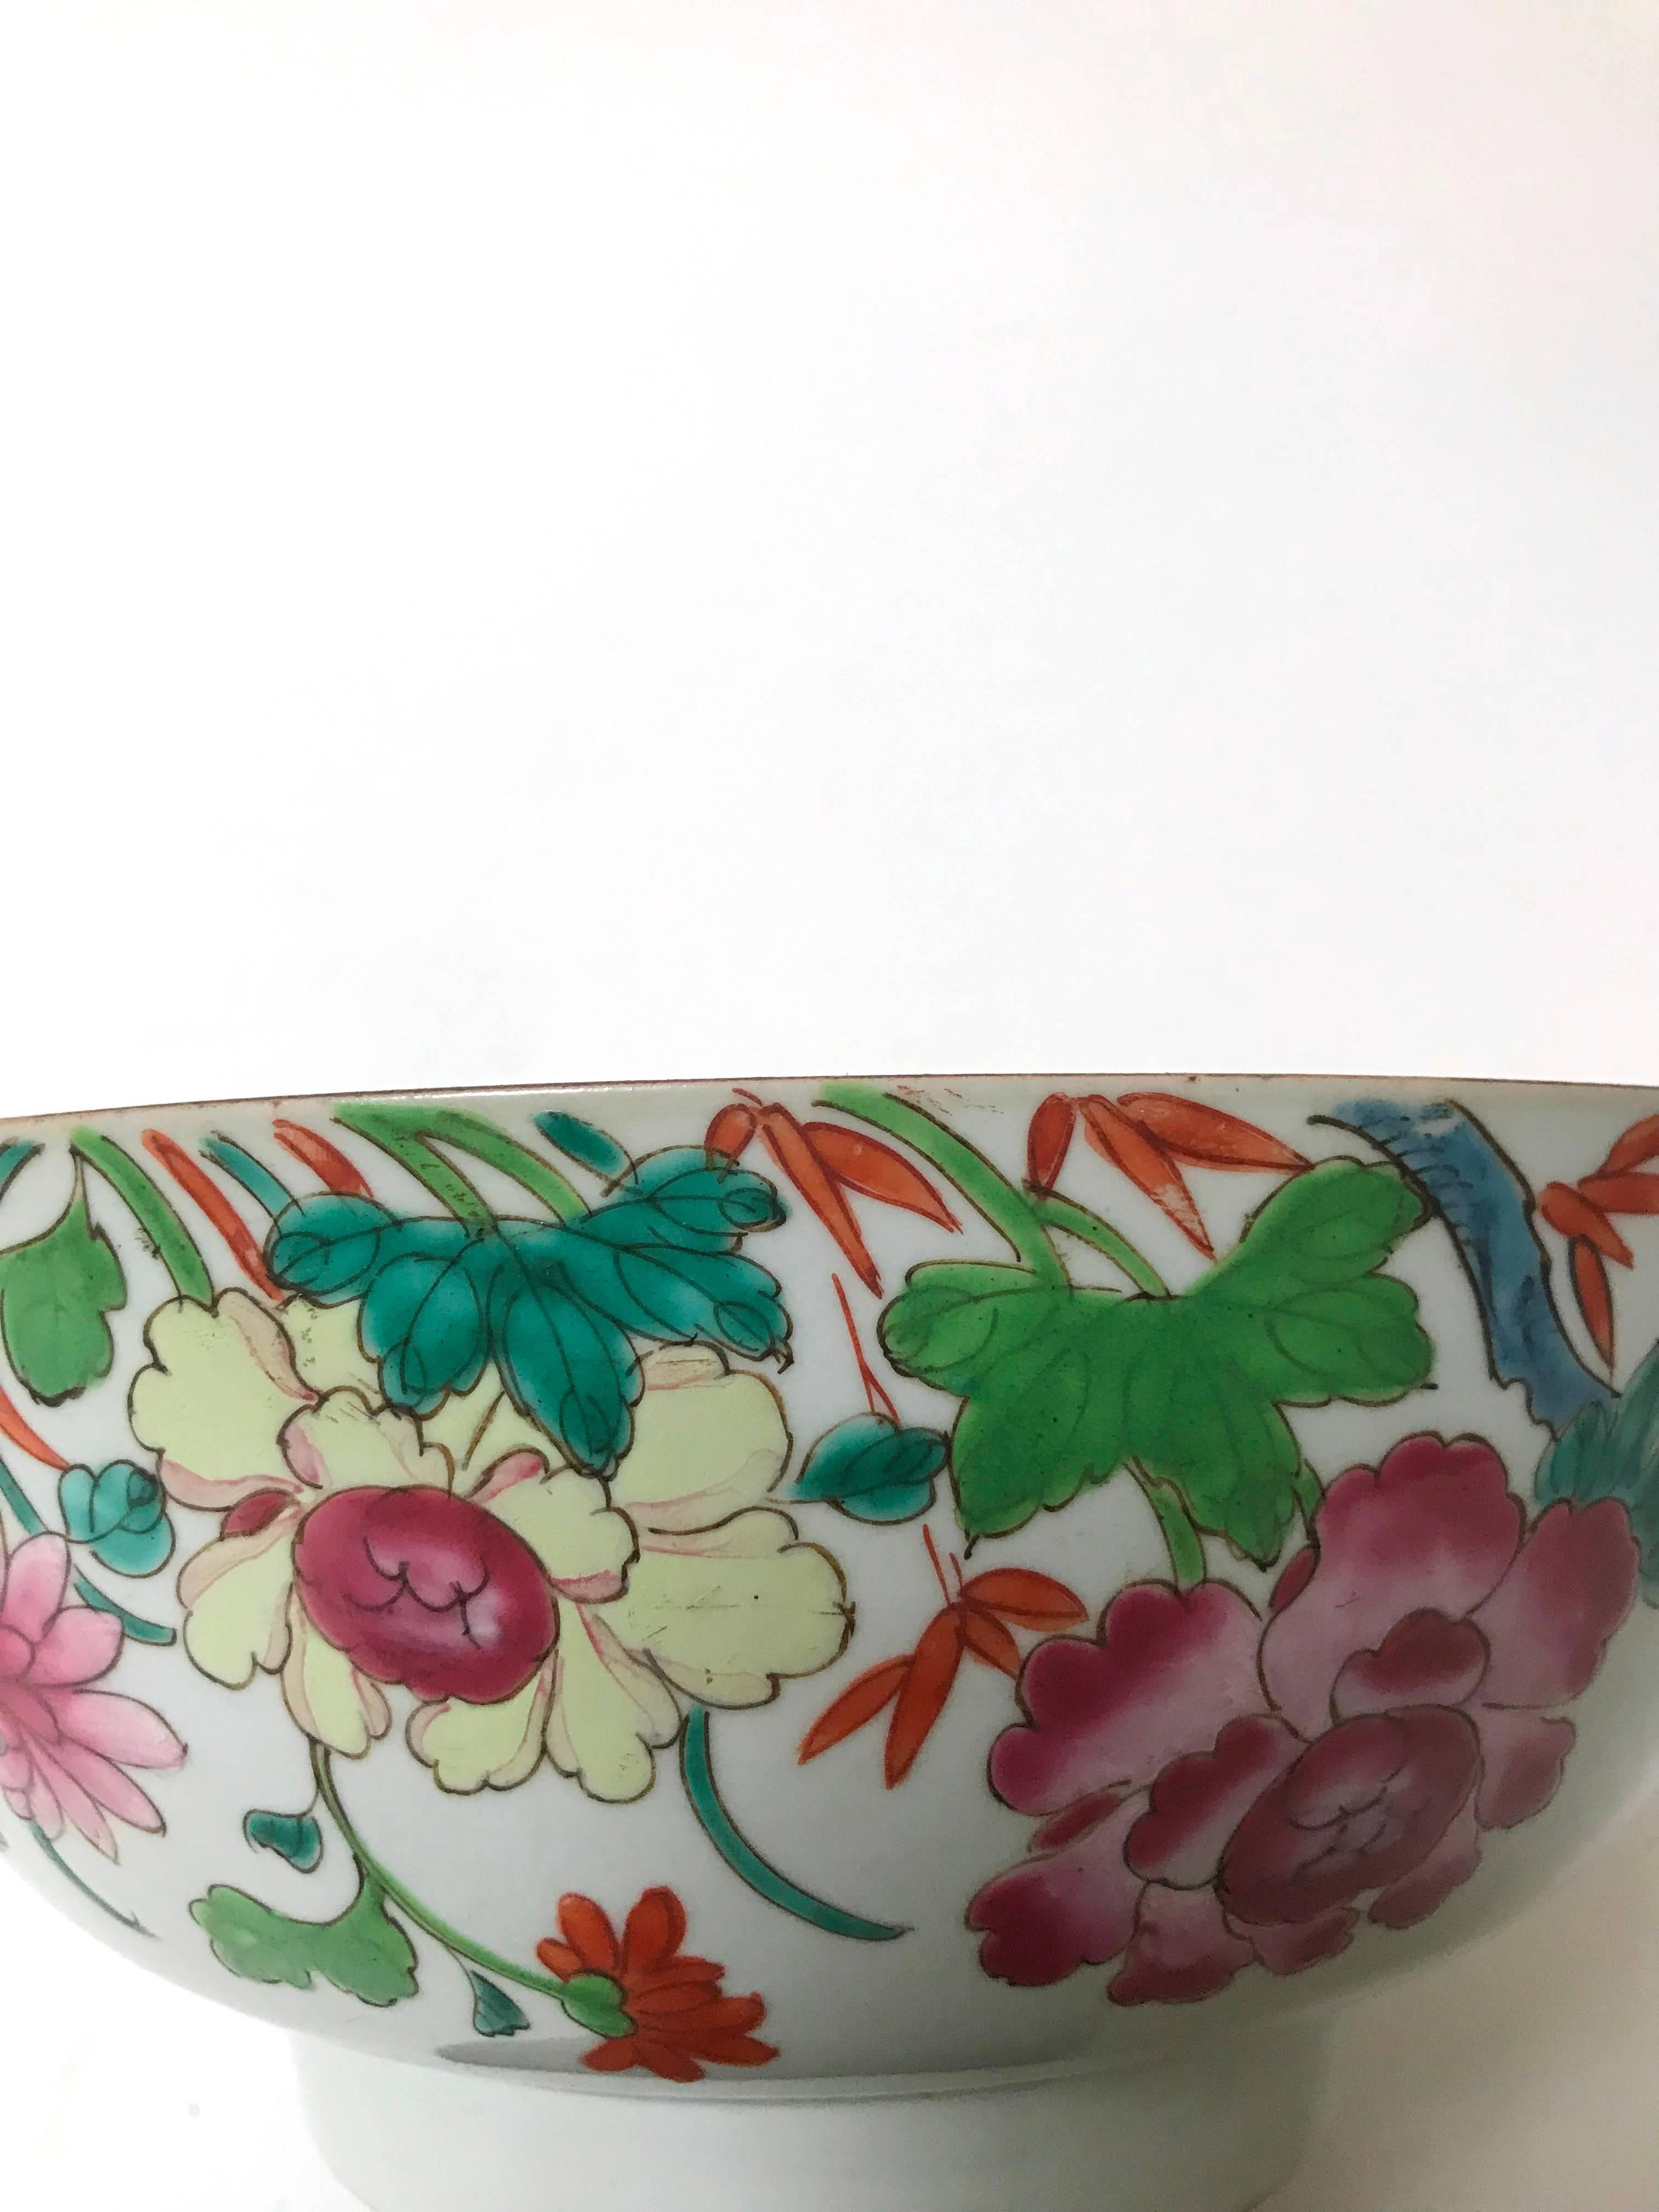 Large Chinese export porcelain centrepiece bowl, second quarter of the 1700s, Yongzheng/early Qianlong period, decorated in famille rose enamels, a floral composition consisting mainly of tree peonies (mudan), the interior rim painted with a frieze